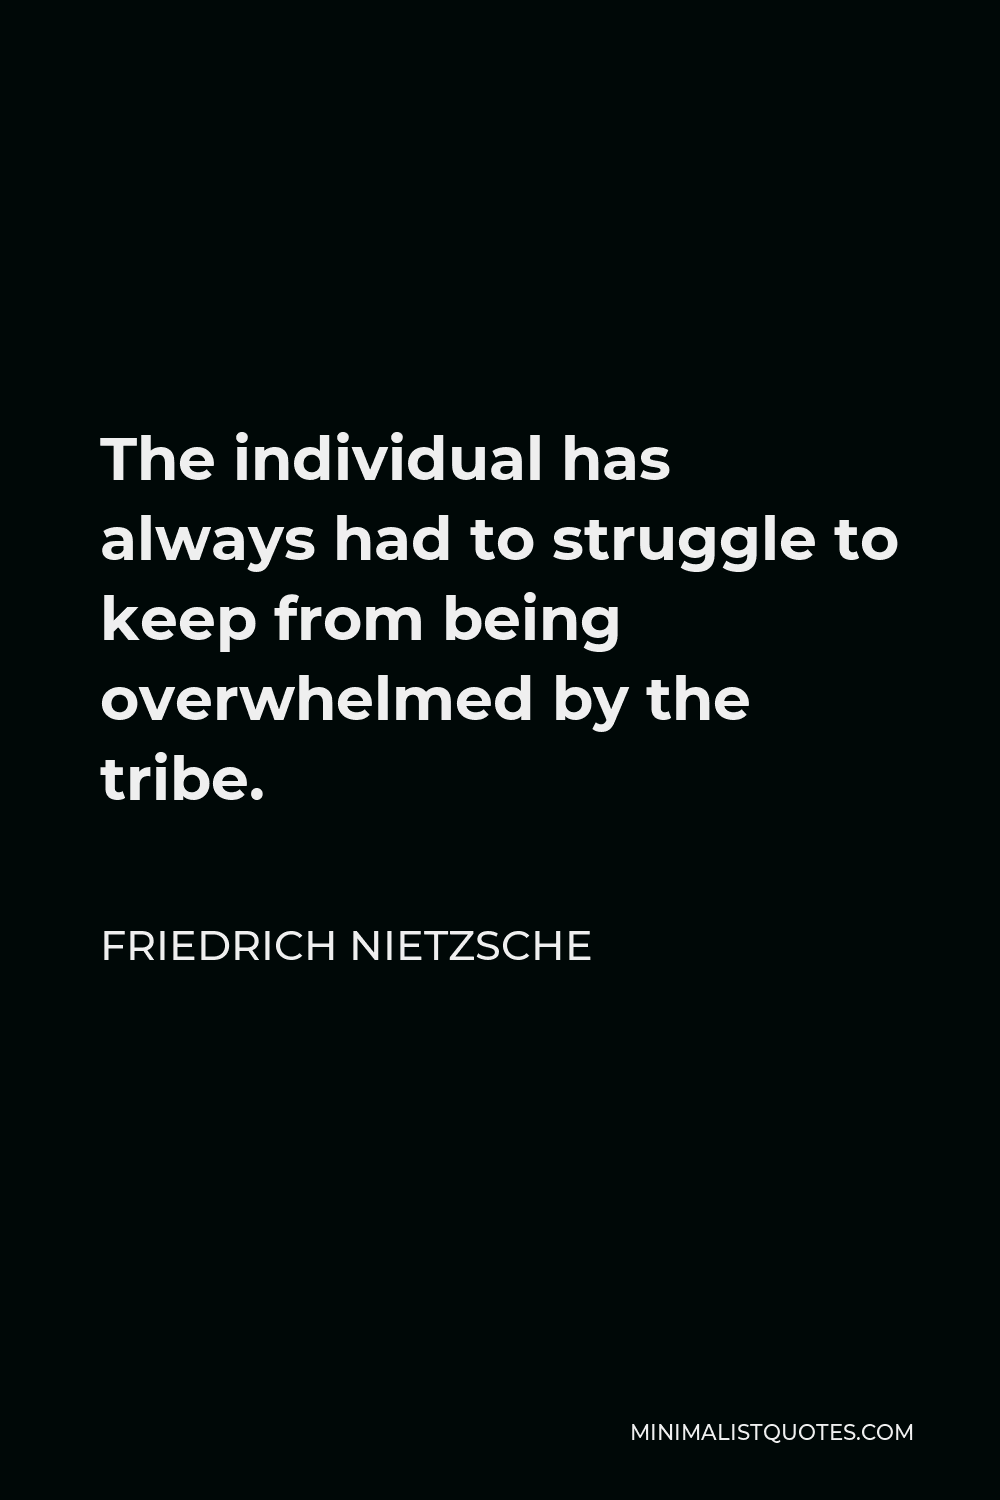 Friedrich Nietzsche Quote - The individual has always had to struggle to keep from being overwhelmed by the tribe.